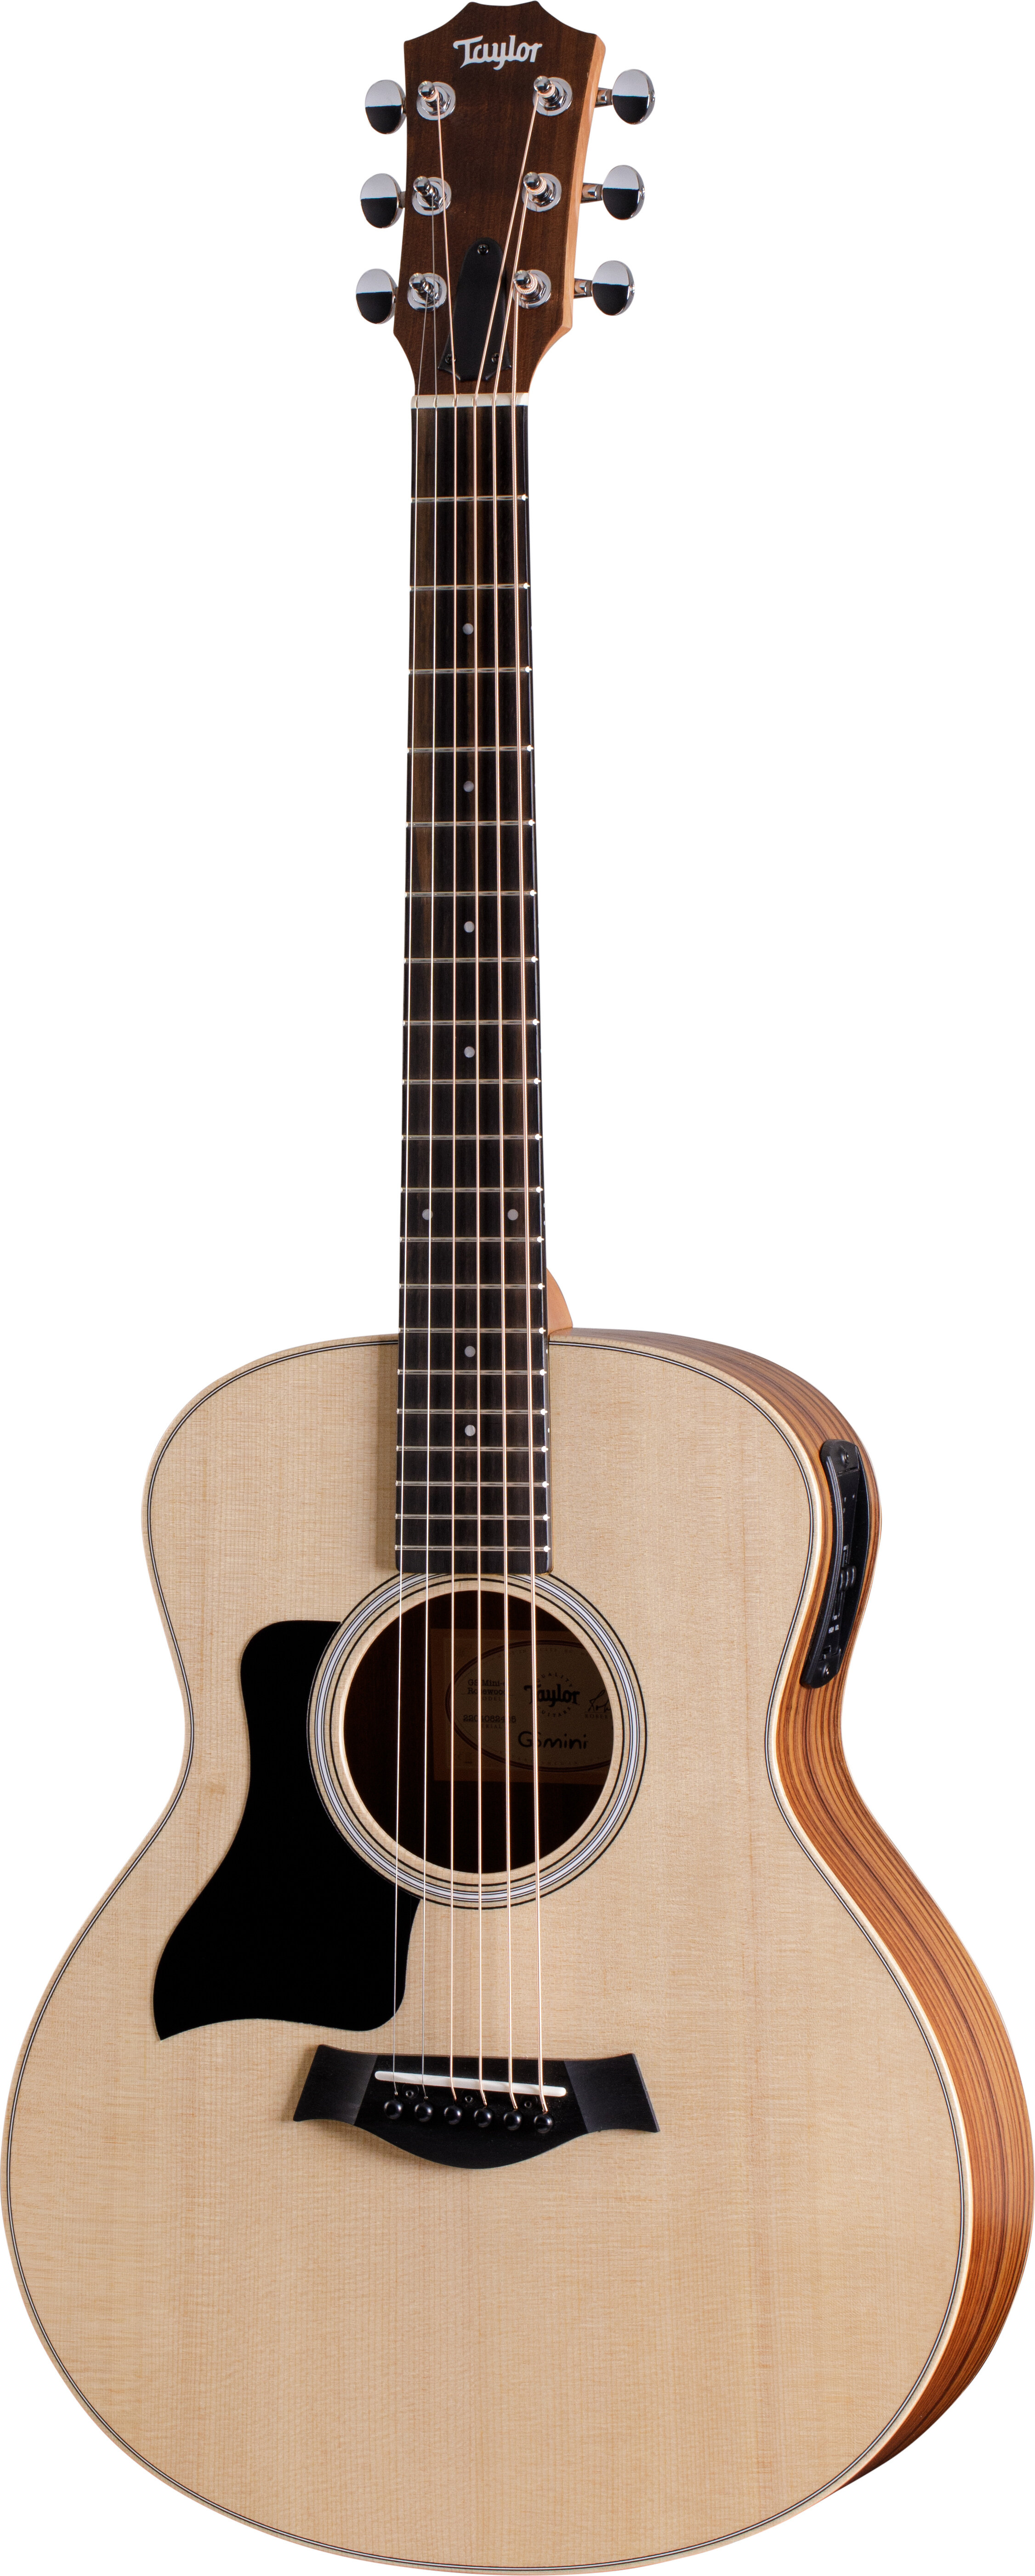 GS Mini-e Rosewood Left-Handed Acoustic Electric -  Taylor Guitars, GSMinie-RW-LH-22